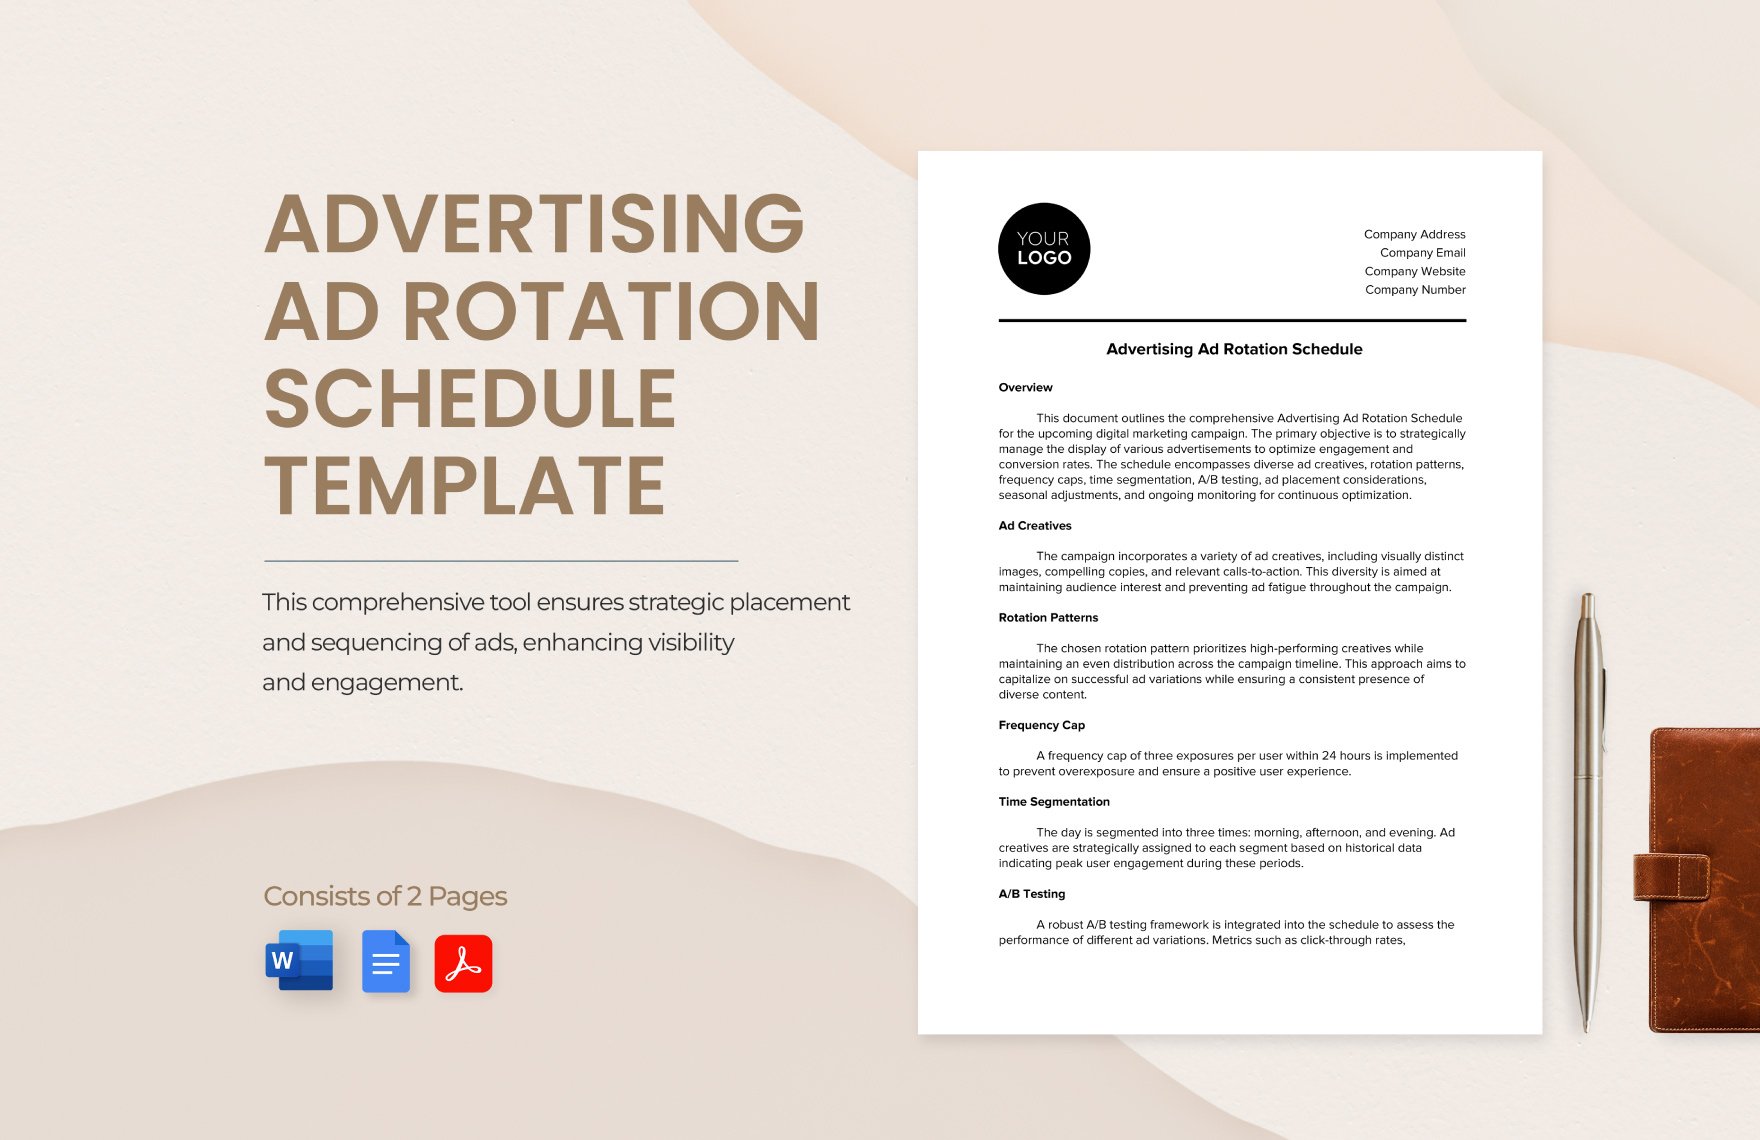 Advertising Ad Rotation Schedule Template in Word, Google Docs, PDF